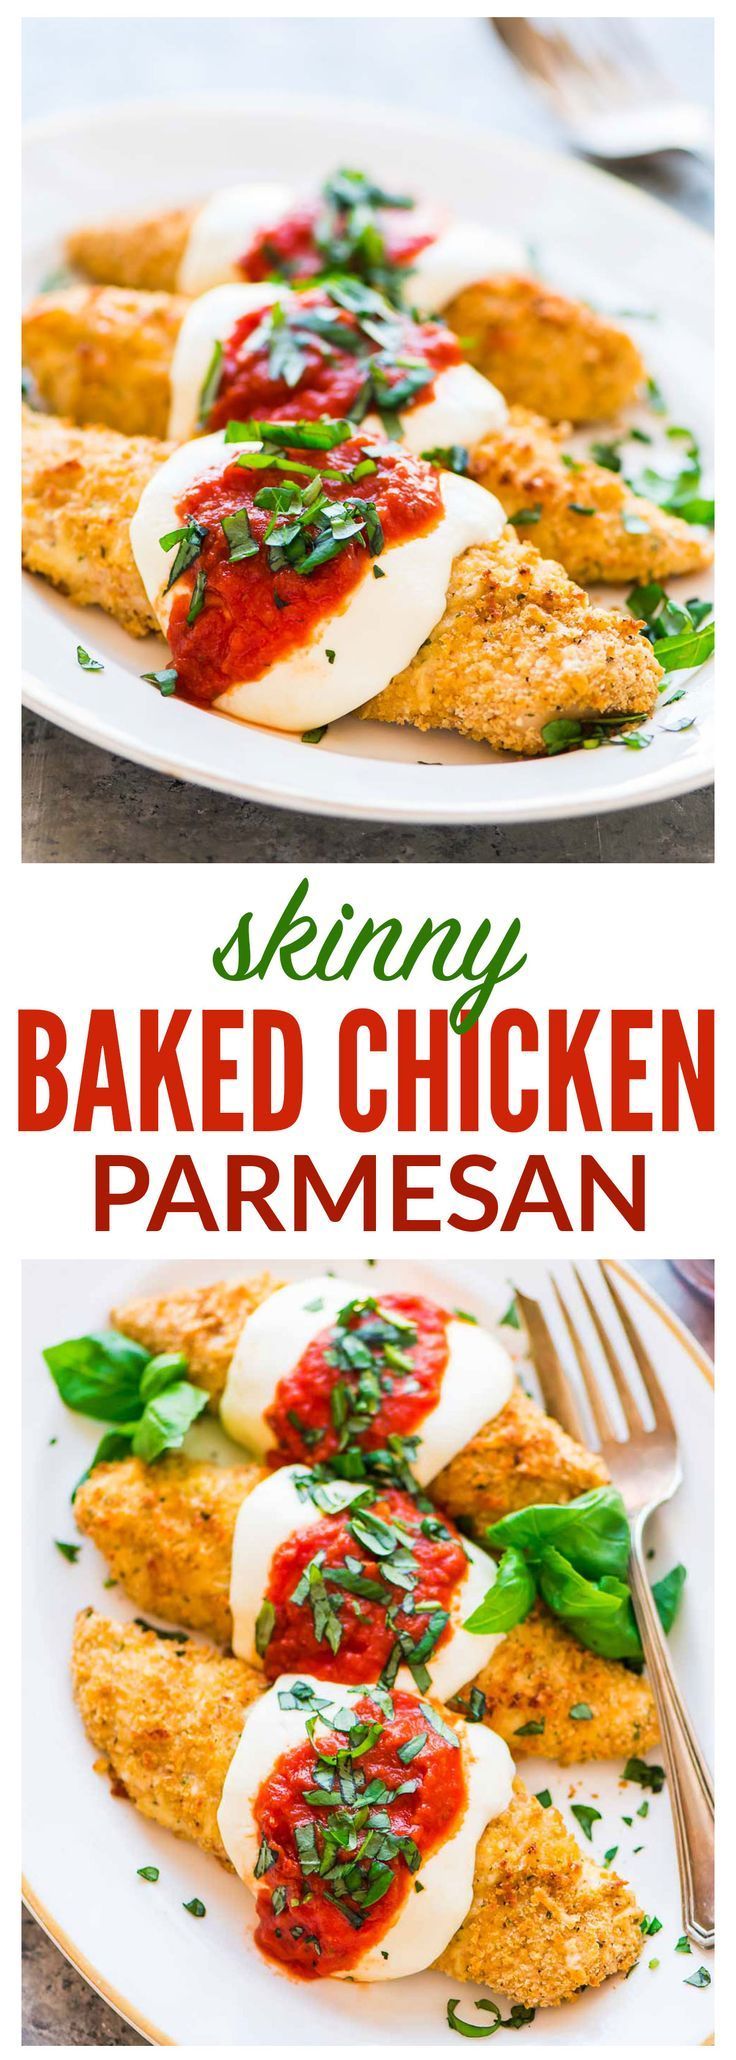 Healthy Baked Chicken Parmesan. Crispy, juicy, and even better than a restaurant! Easy, kid-friendly recipe. Ready in 30 minutes!